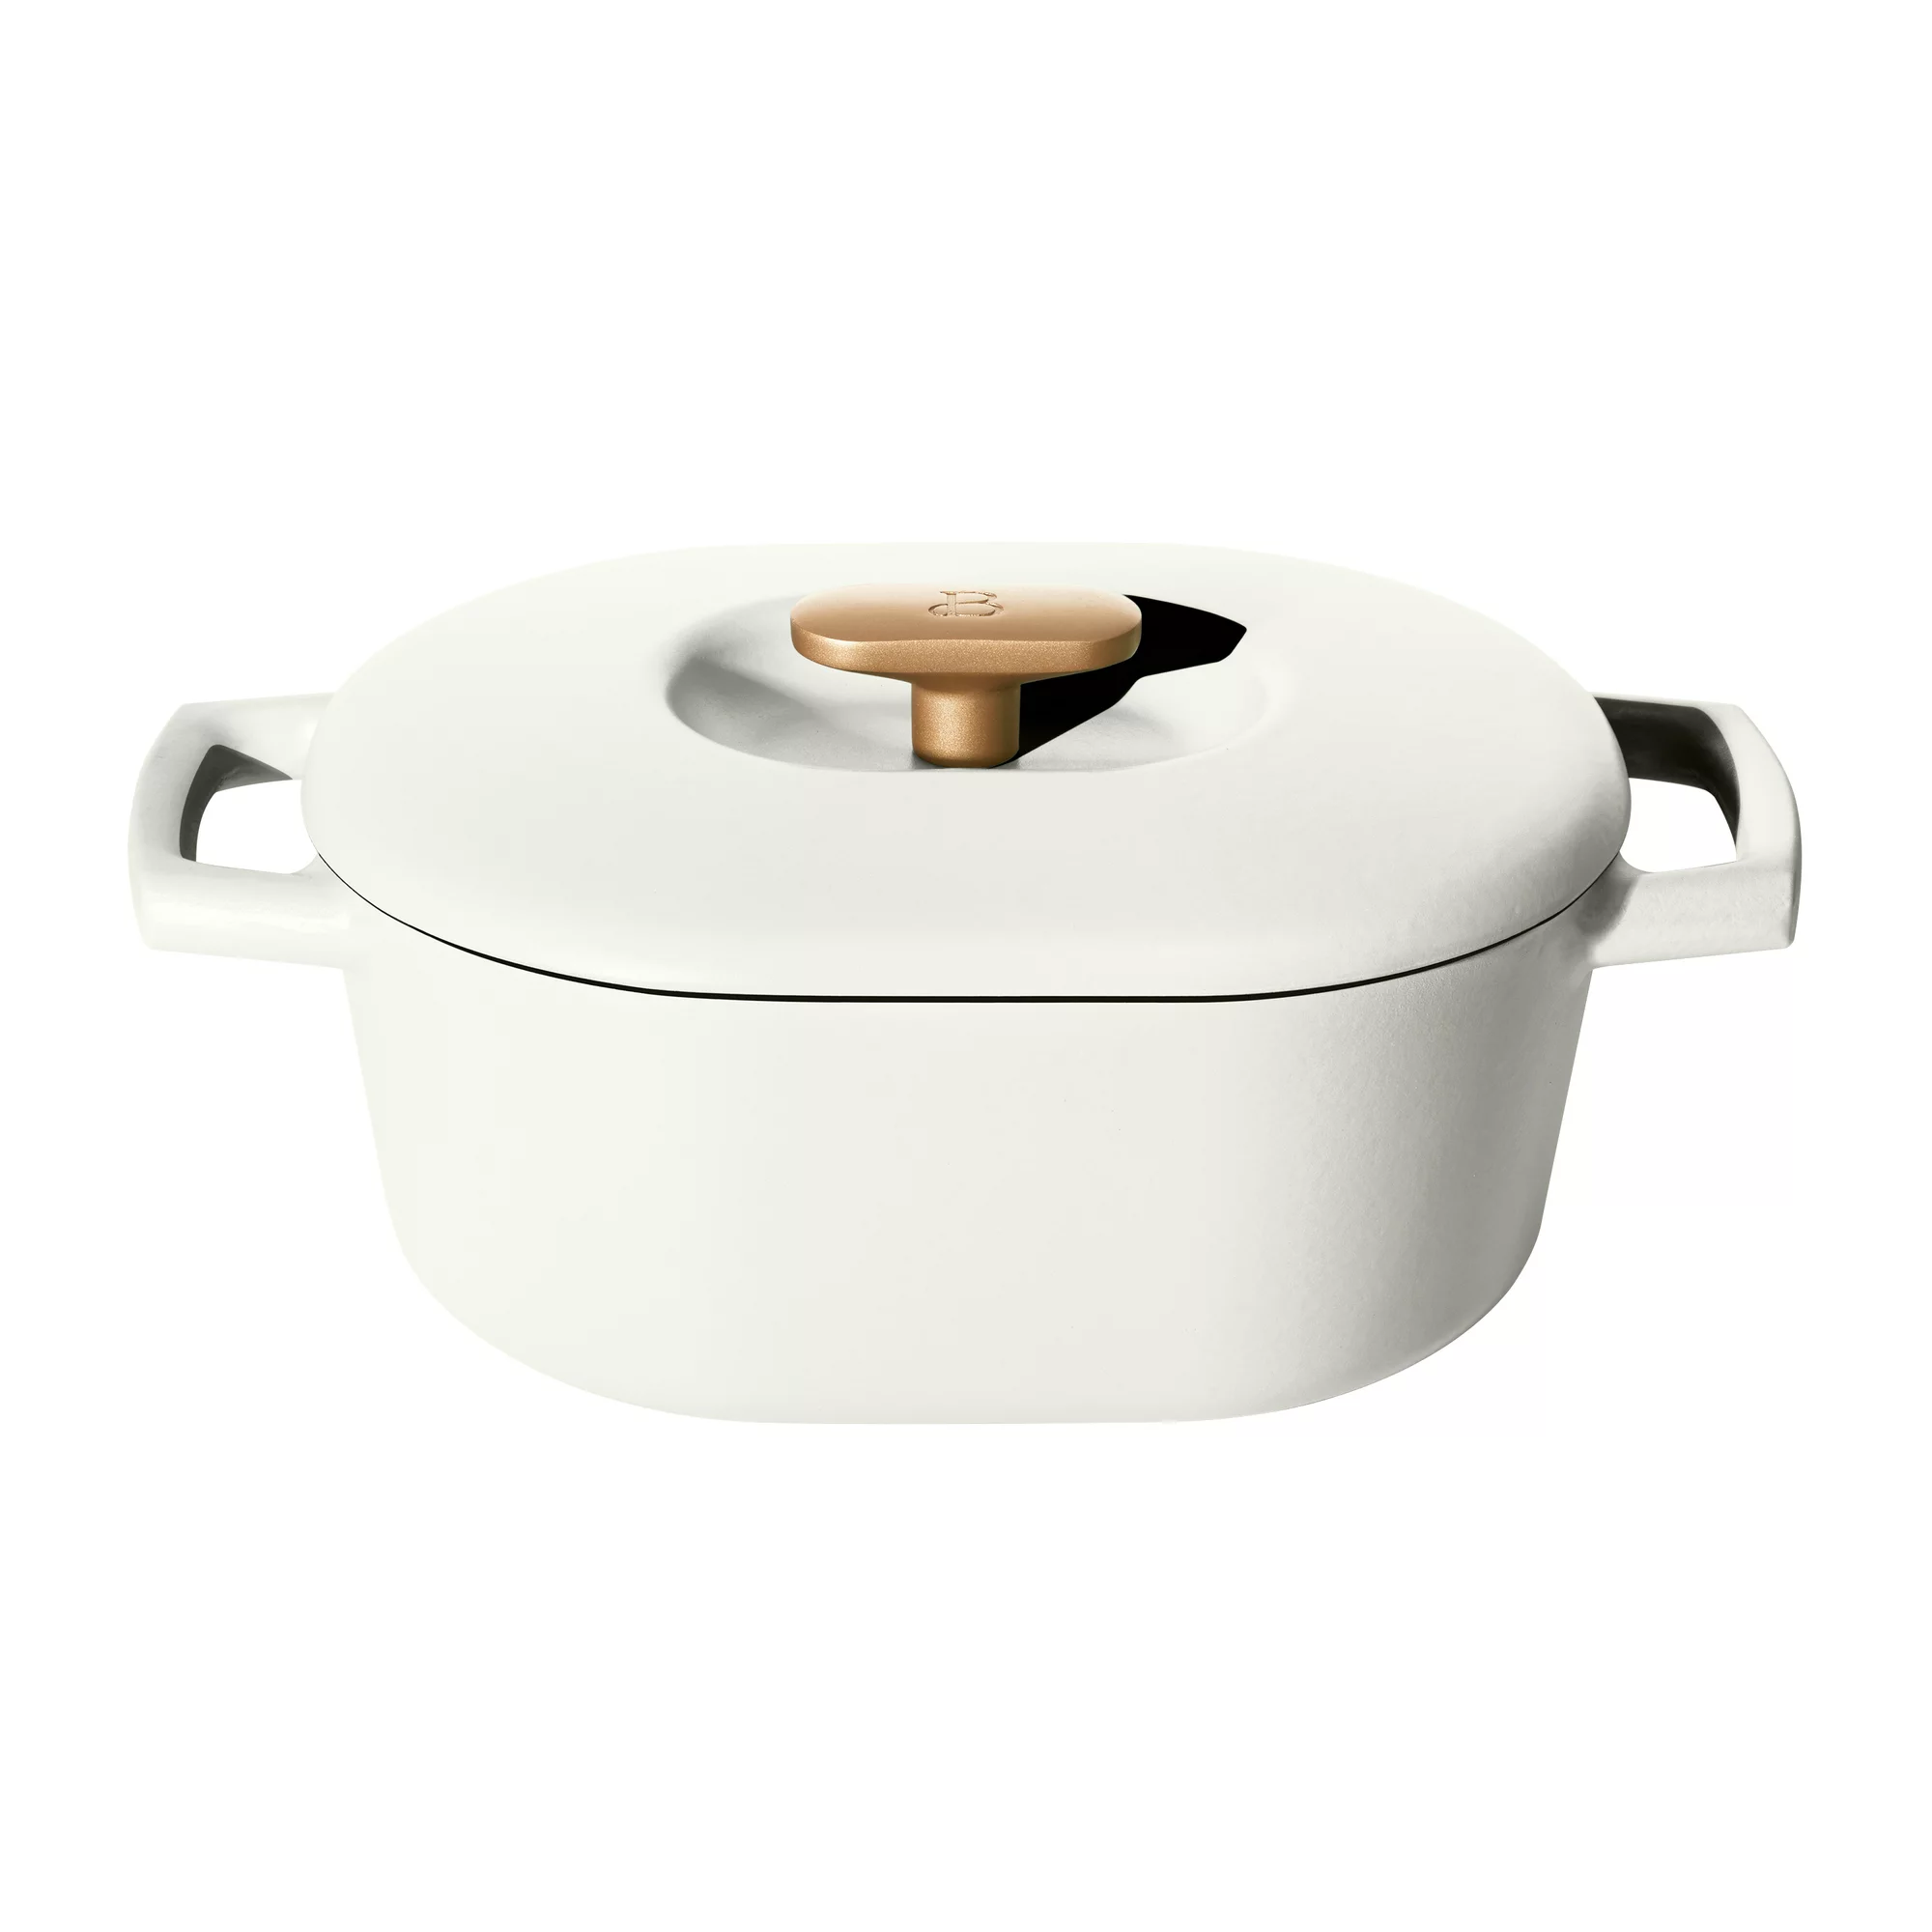 https://discounttoday.net/wp-content/uploads/2022/12/Beautiful-6QT-Enamel-Dutch-Oven-White-Icing-by-Drew-Barrymore-White3.webp